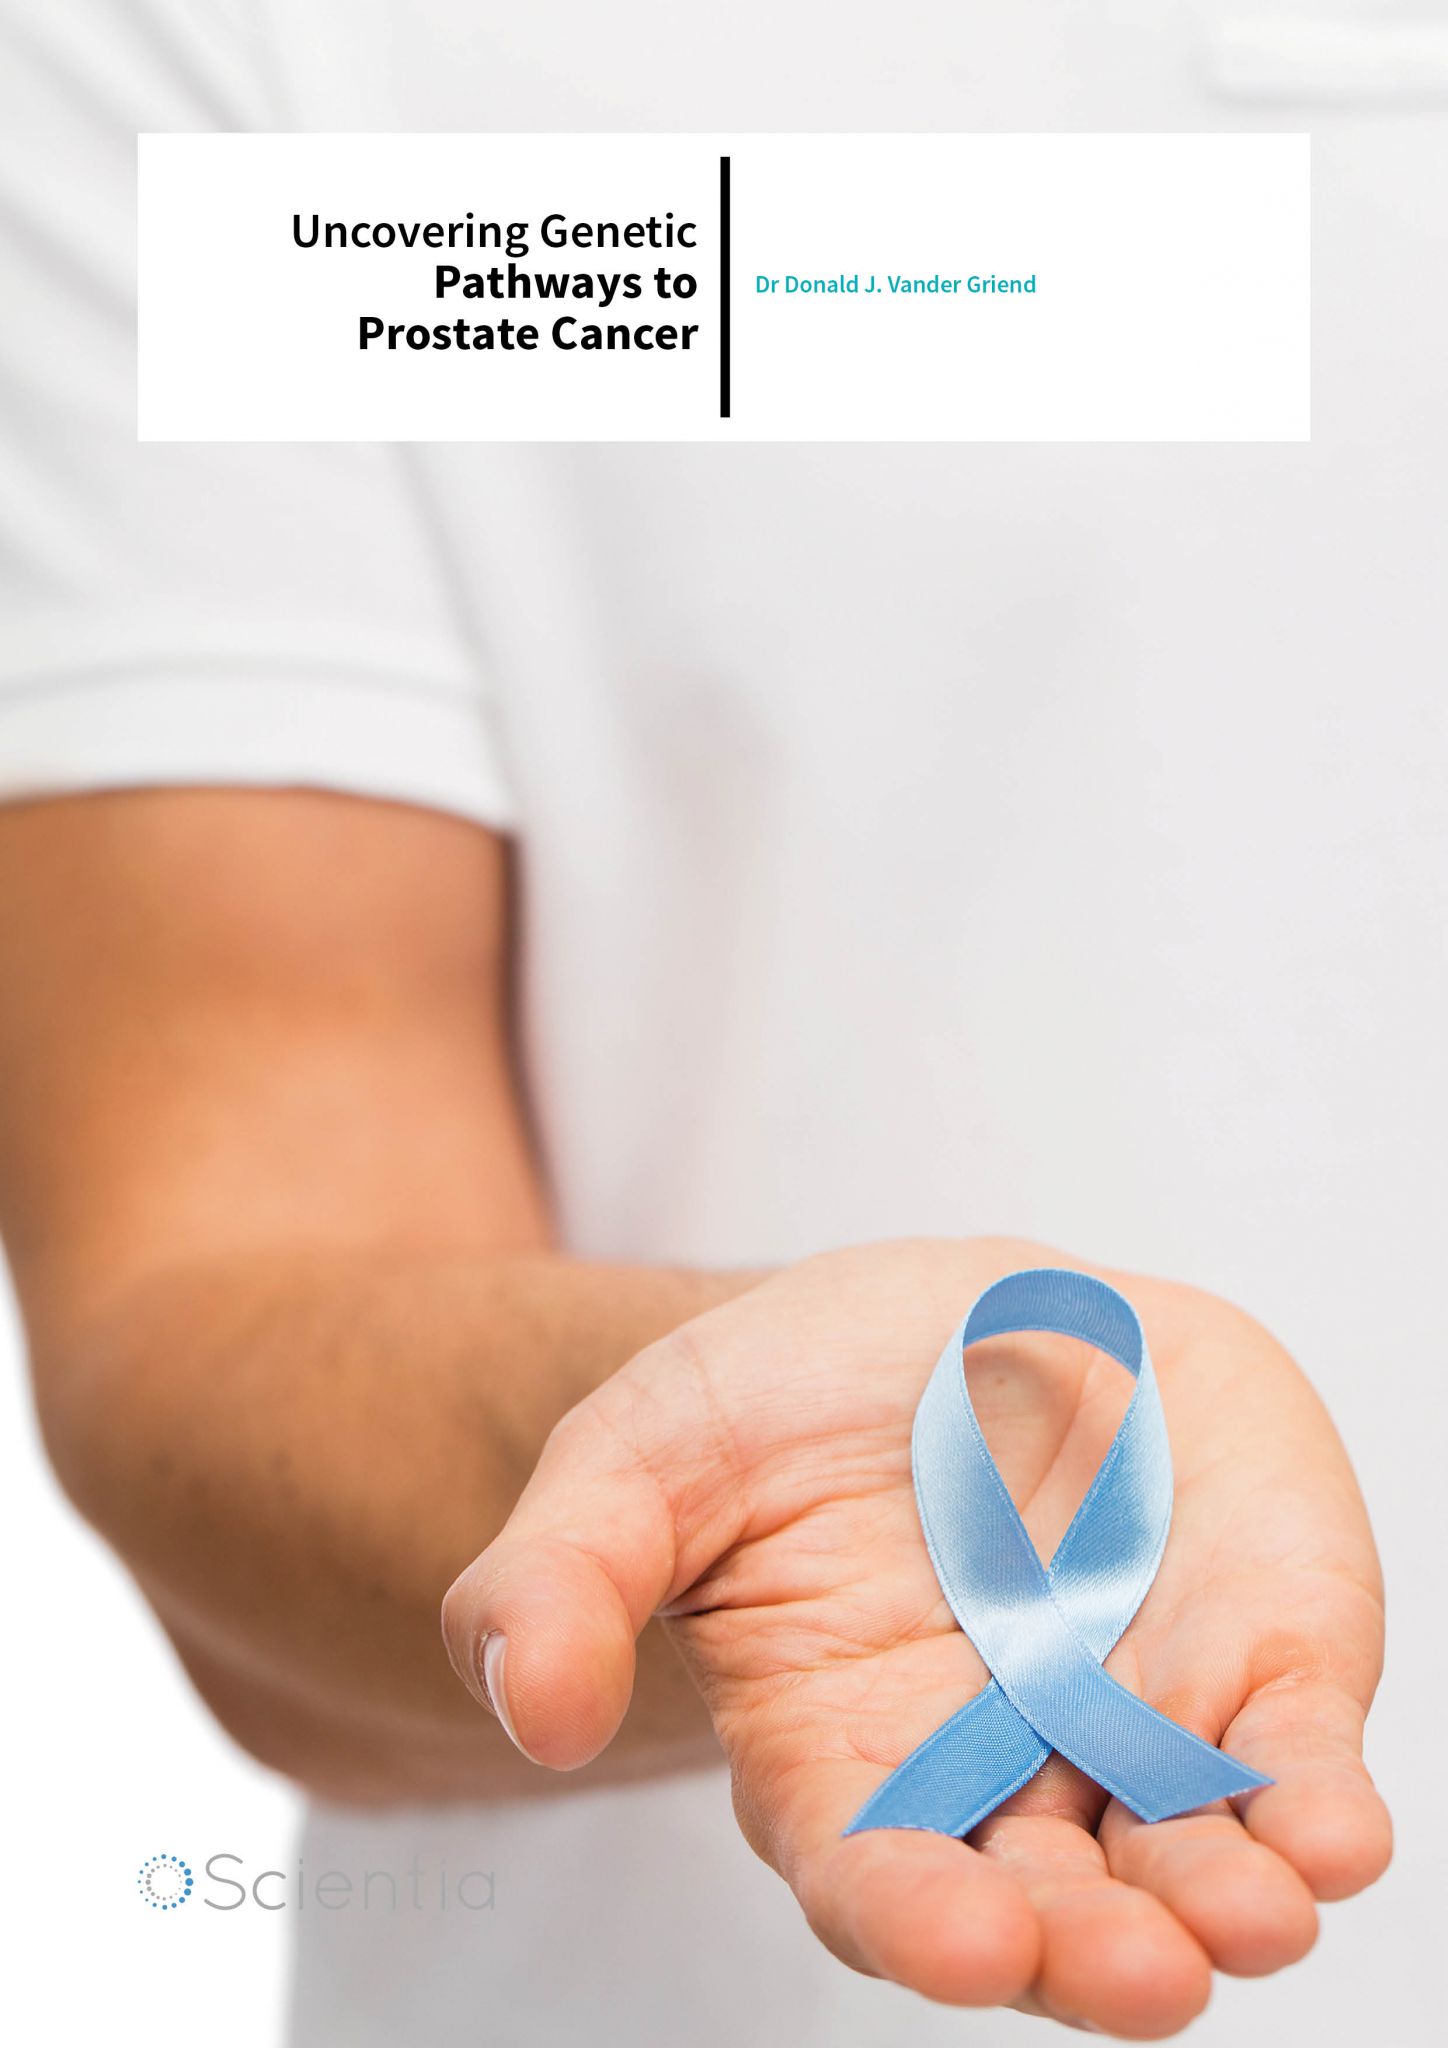 Dr Donald J. Vander Griend – Uncovering Genetic Pathways to Prostate Cancer